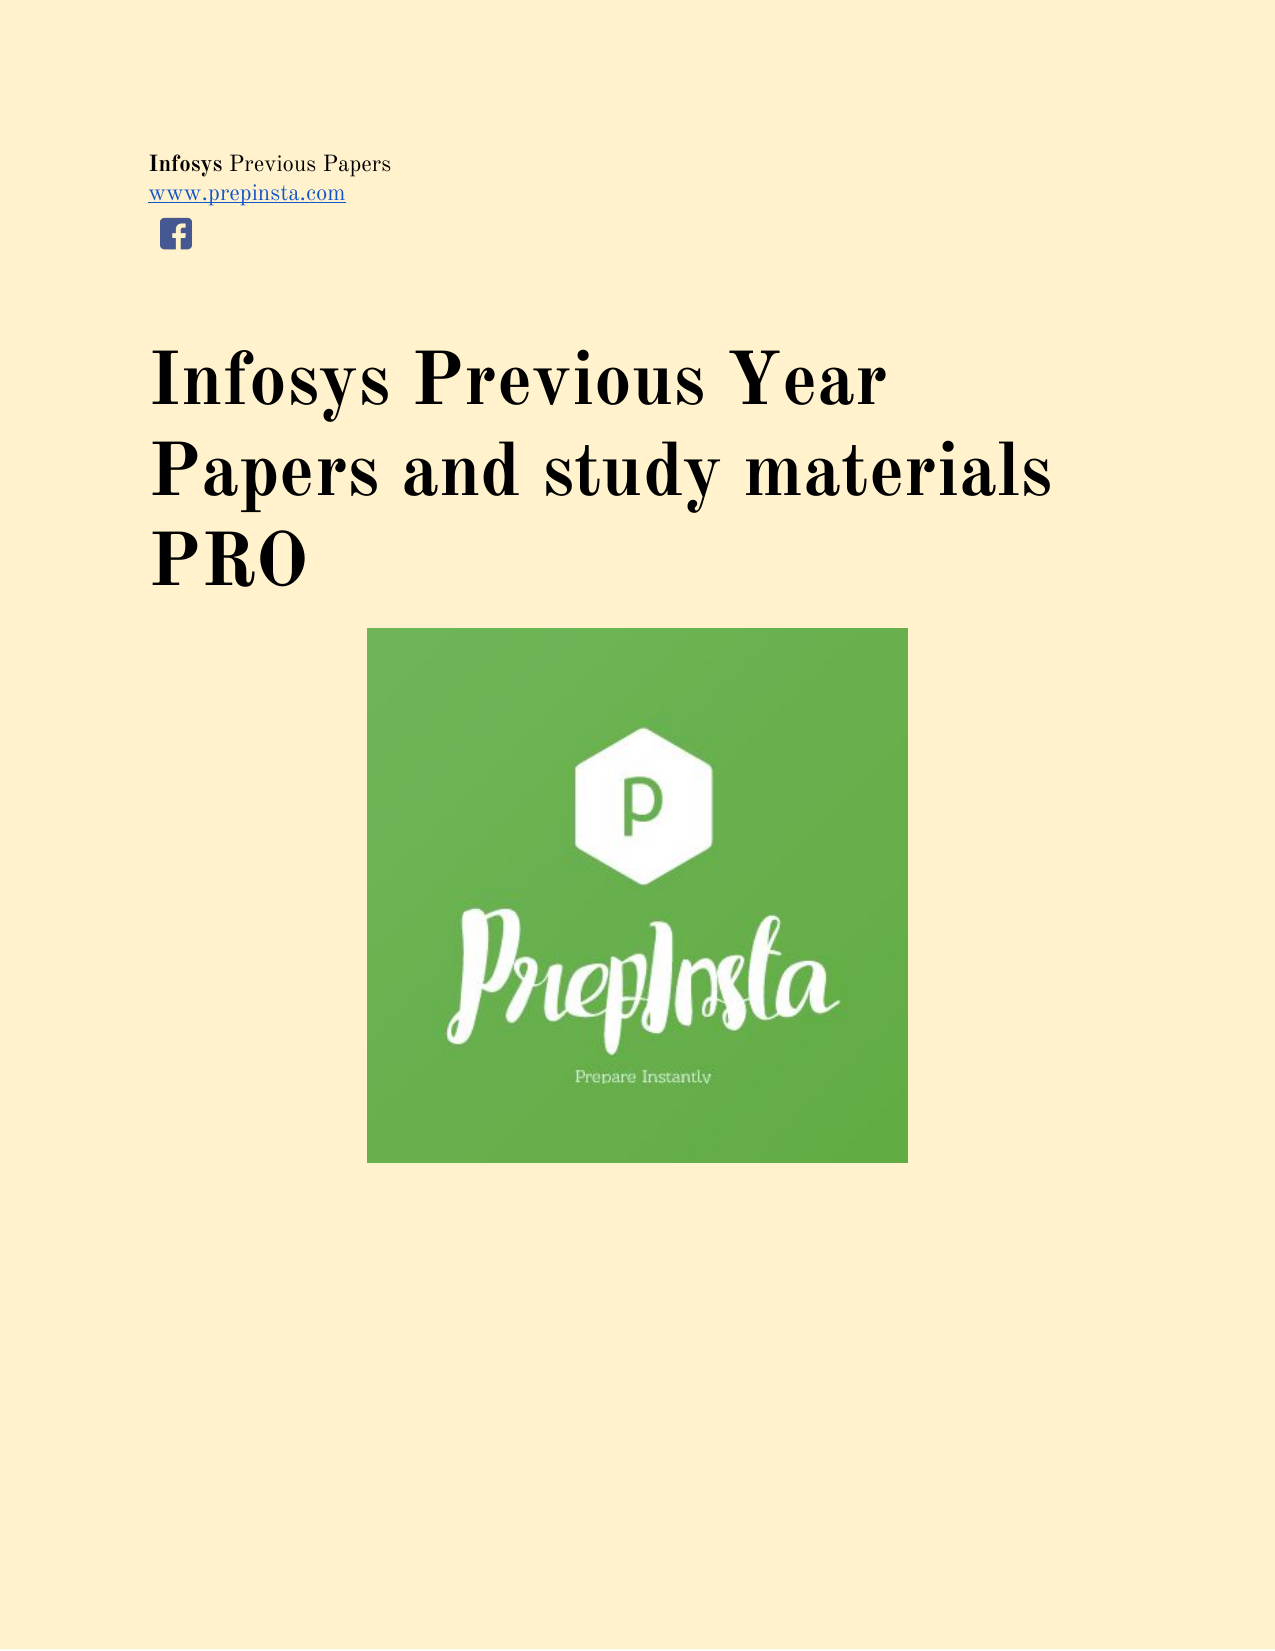 infosys training study material downloads